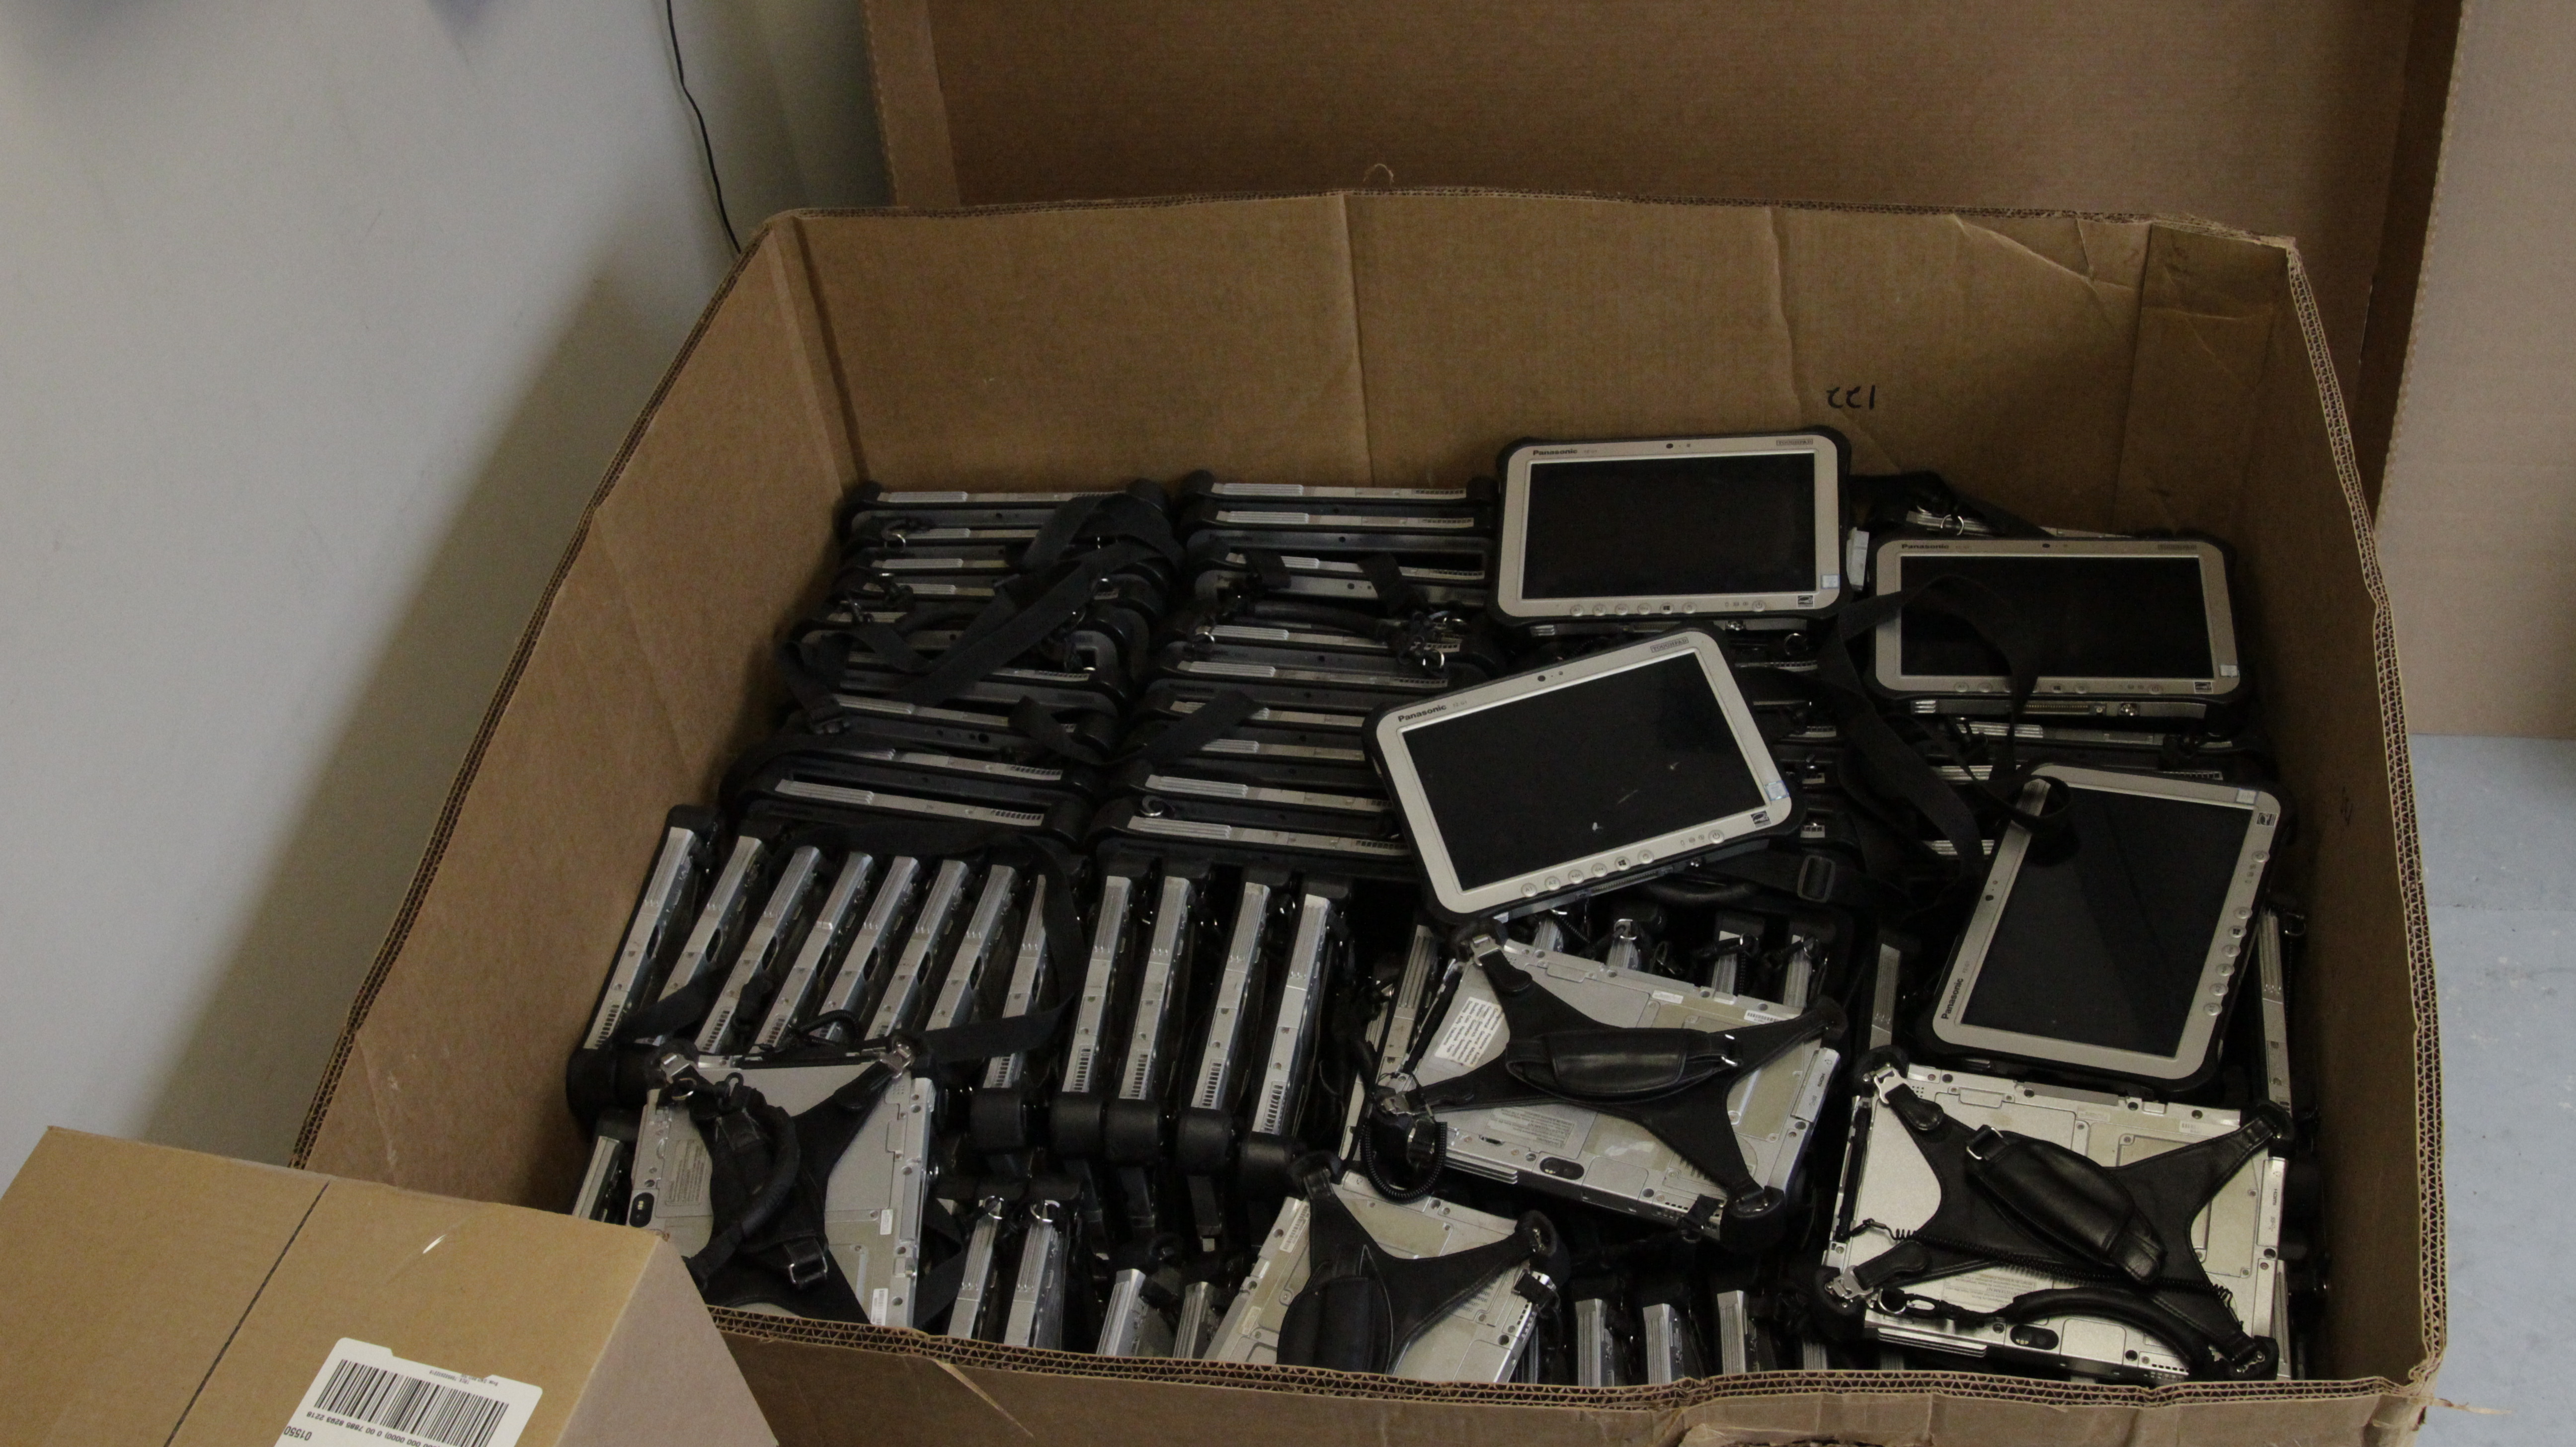 A box full of FZ-G1 fully rugged tablets shipped in on a pallet to Bob Johnson's Computer Stuff